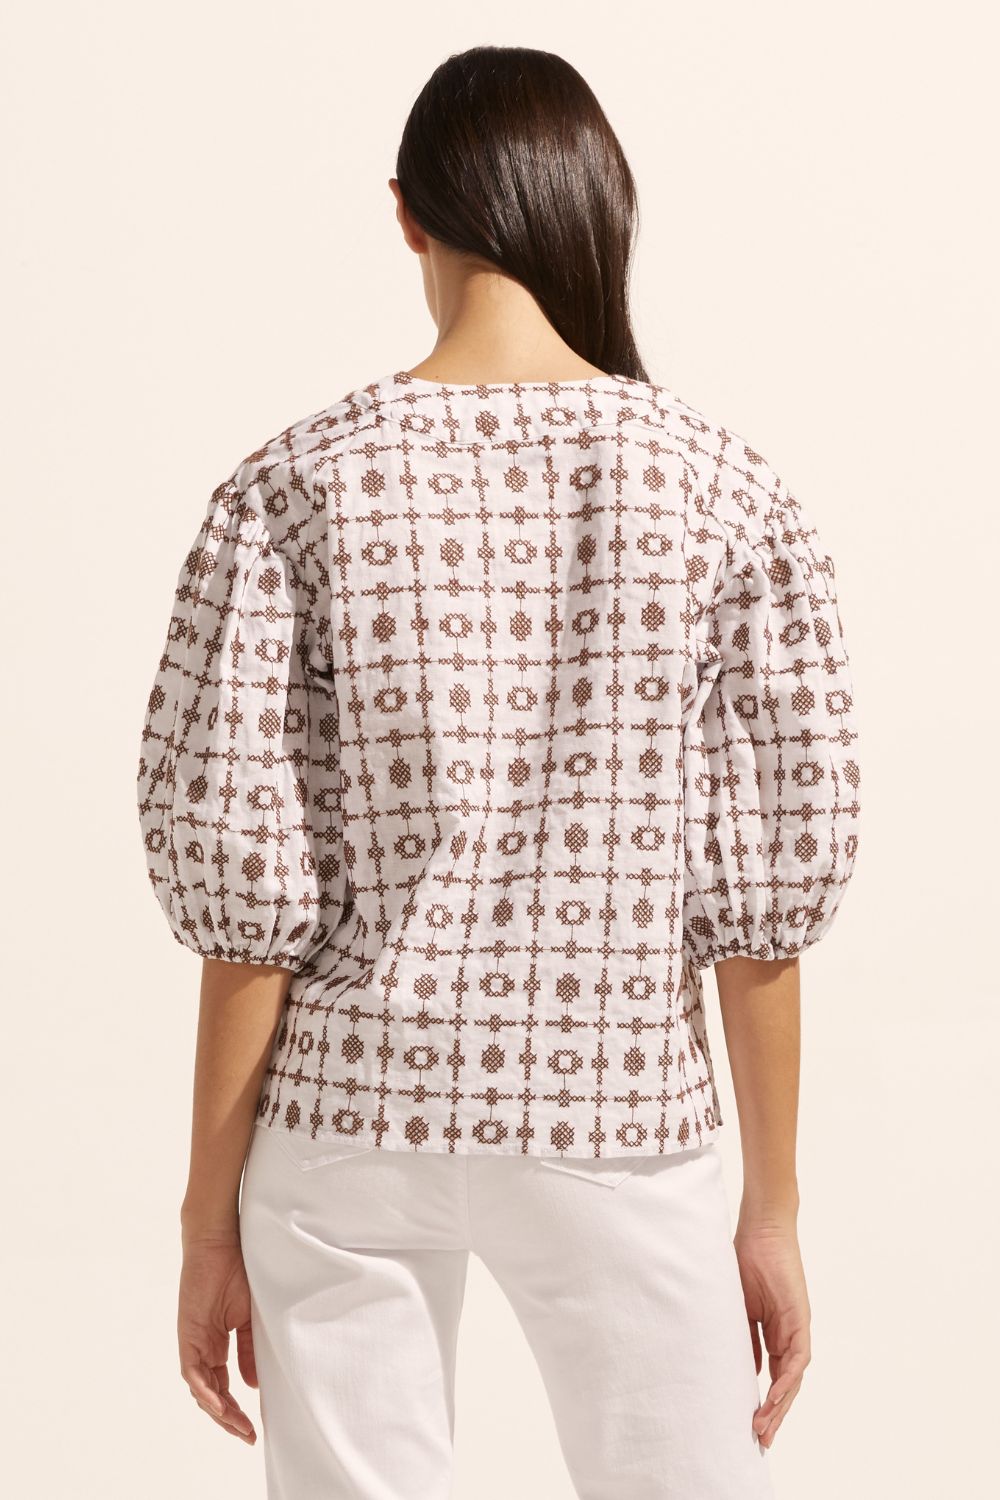 brown and white, top, mid length sleeve, button down neckline, embroidered, back image